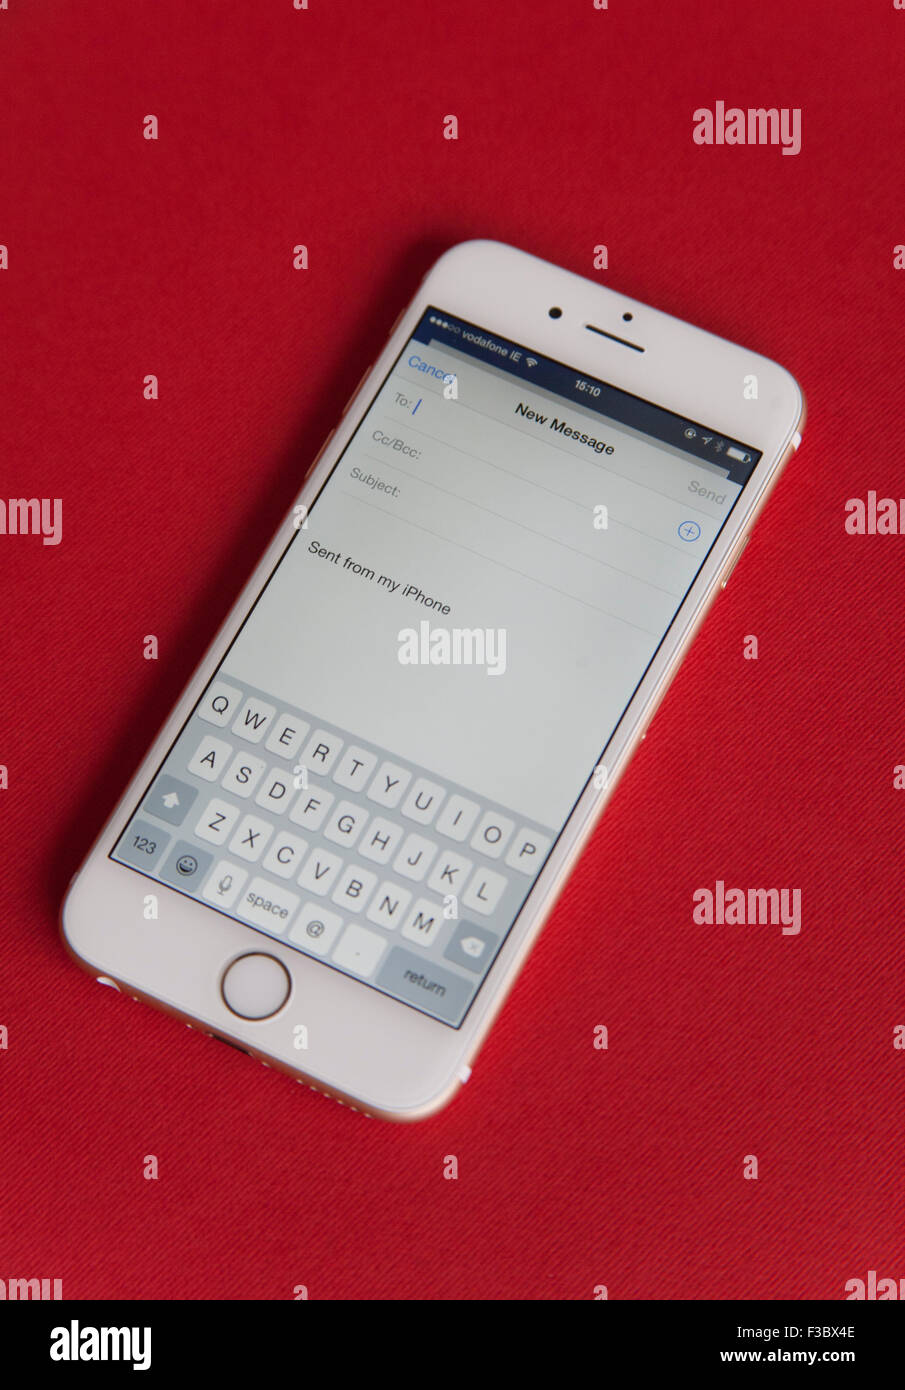 Sending an email on a Gold and white Apple iPhone 6 against a red background Stock Photo